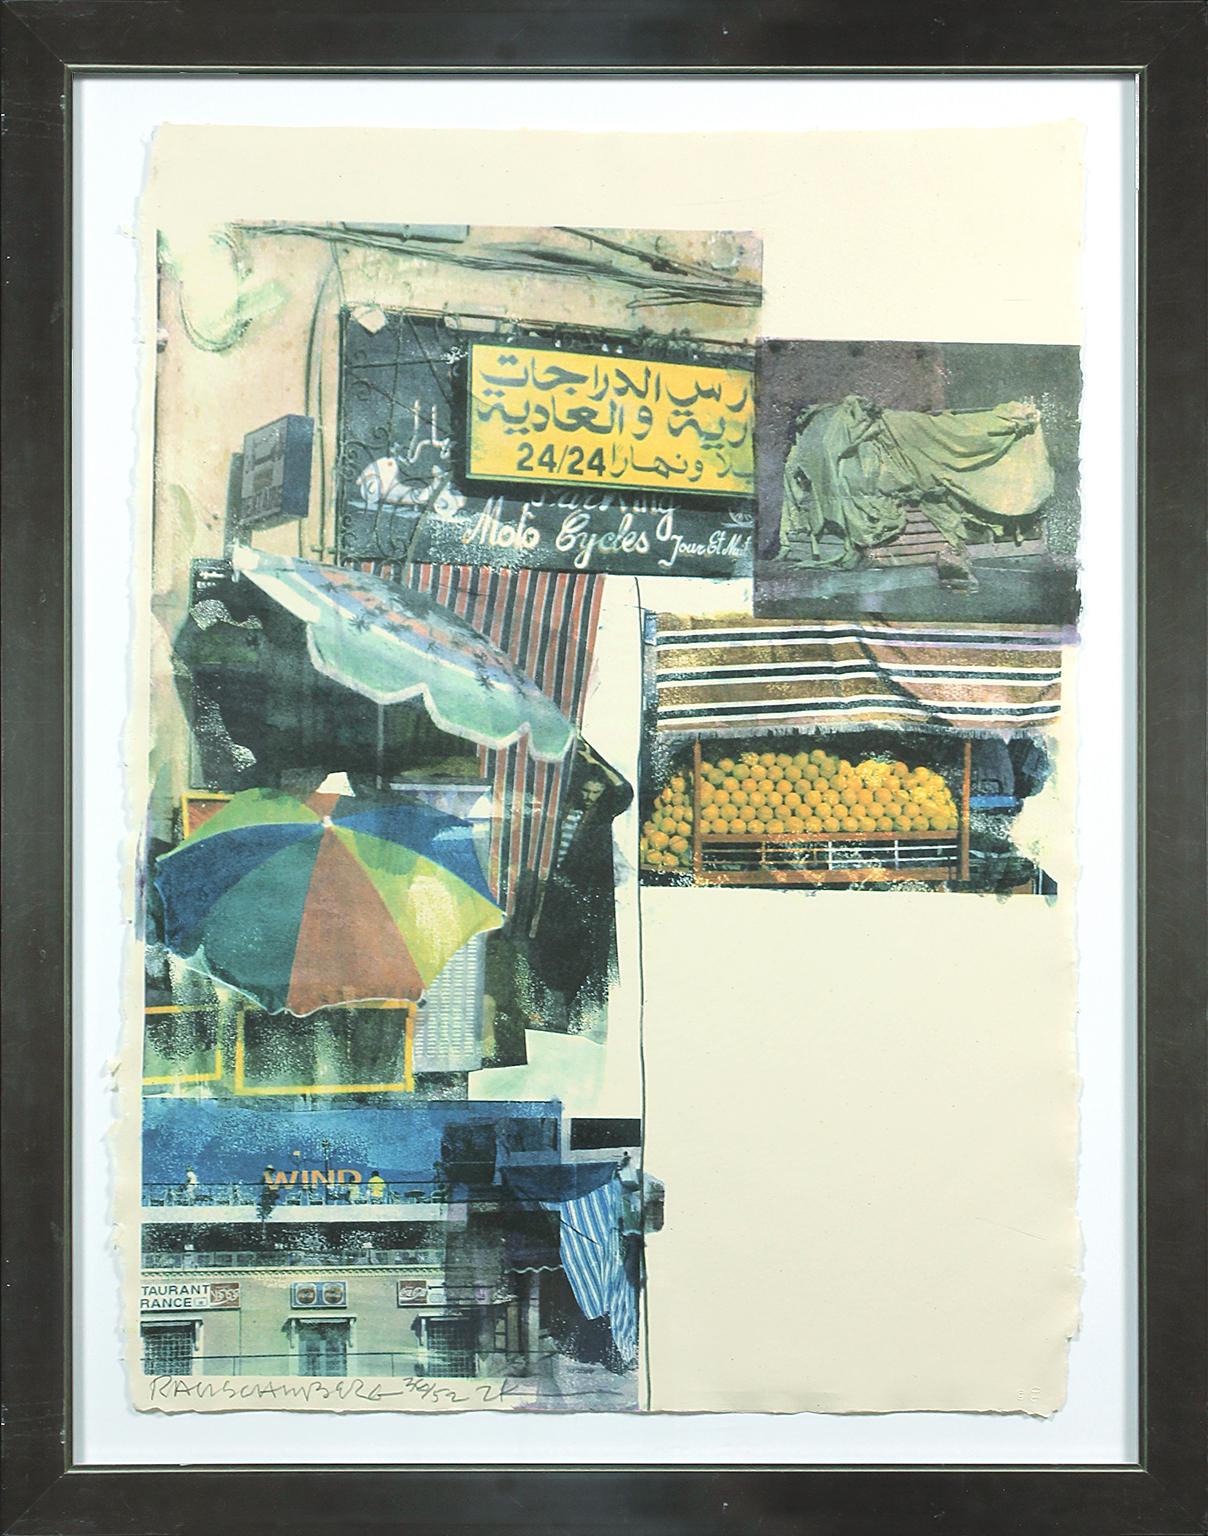 Flaps 12-color screen print by Robert Rauschenberg Edition 36 of 52